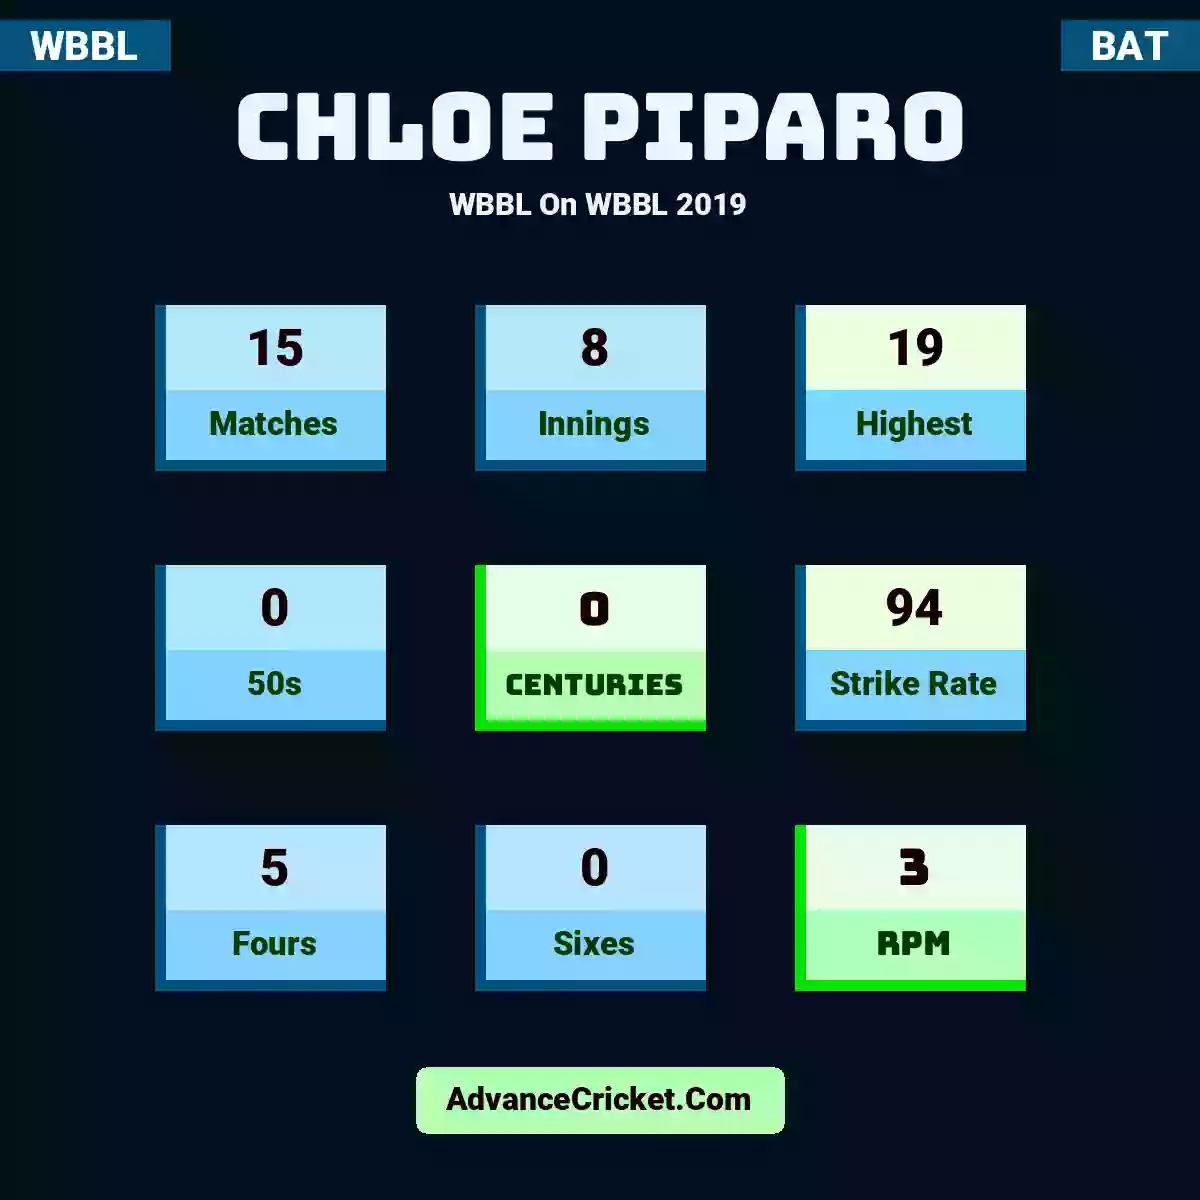 Chloe Piparo WBBL  On WBBL 2019, Chloe Piparo played 15 matches, scored 19 runs as highest, 0 half-centuries, and 0 centuries, with a strike rate of 94. C.Piparo hit 5 fours and 0 sixes, with an RPM of 3.